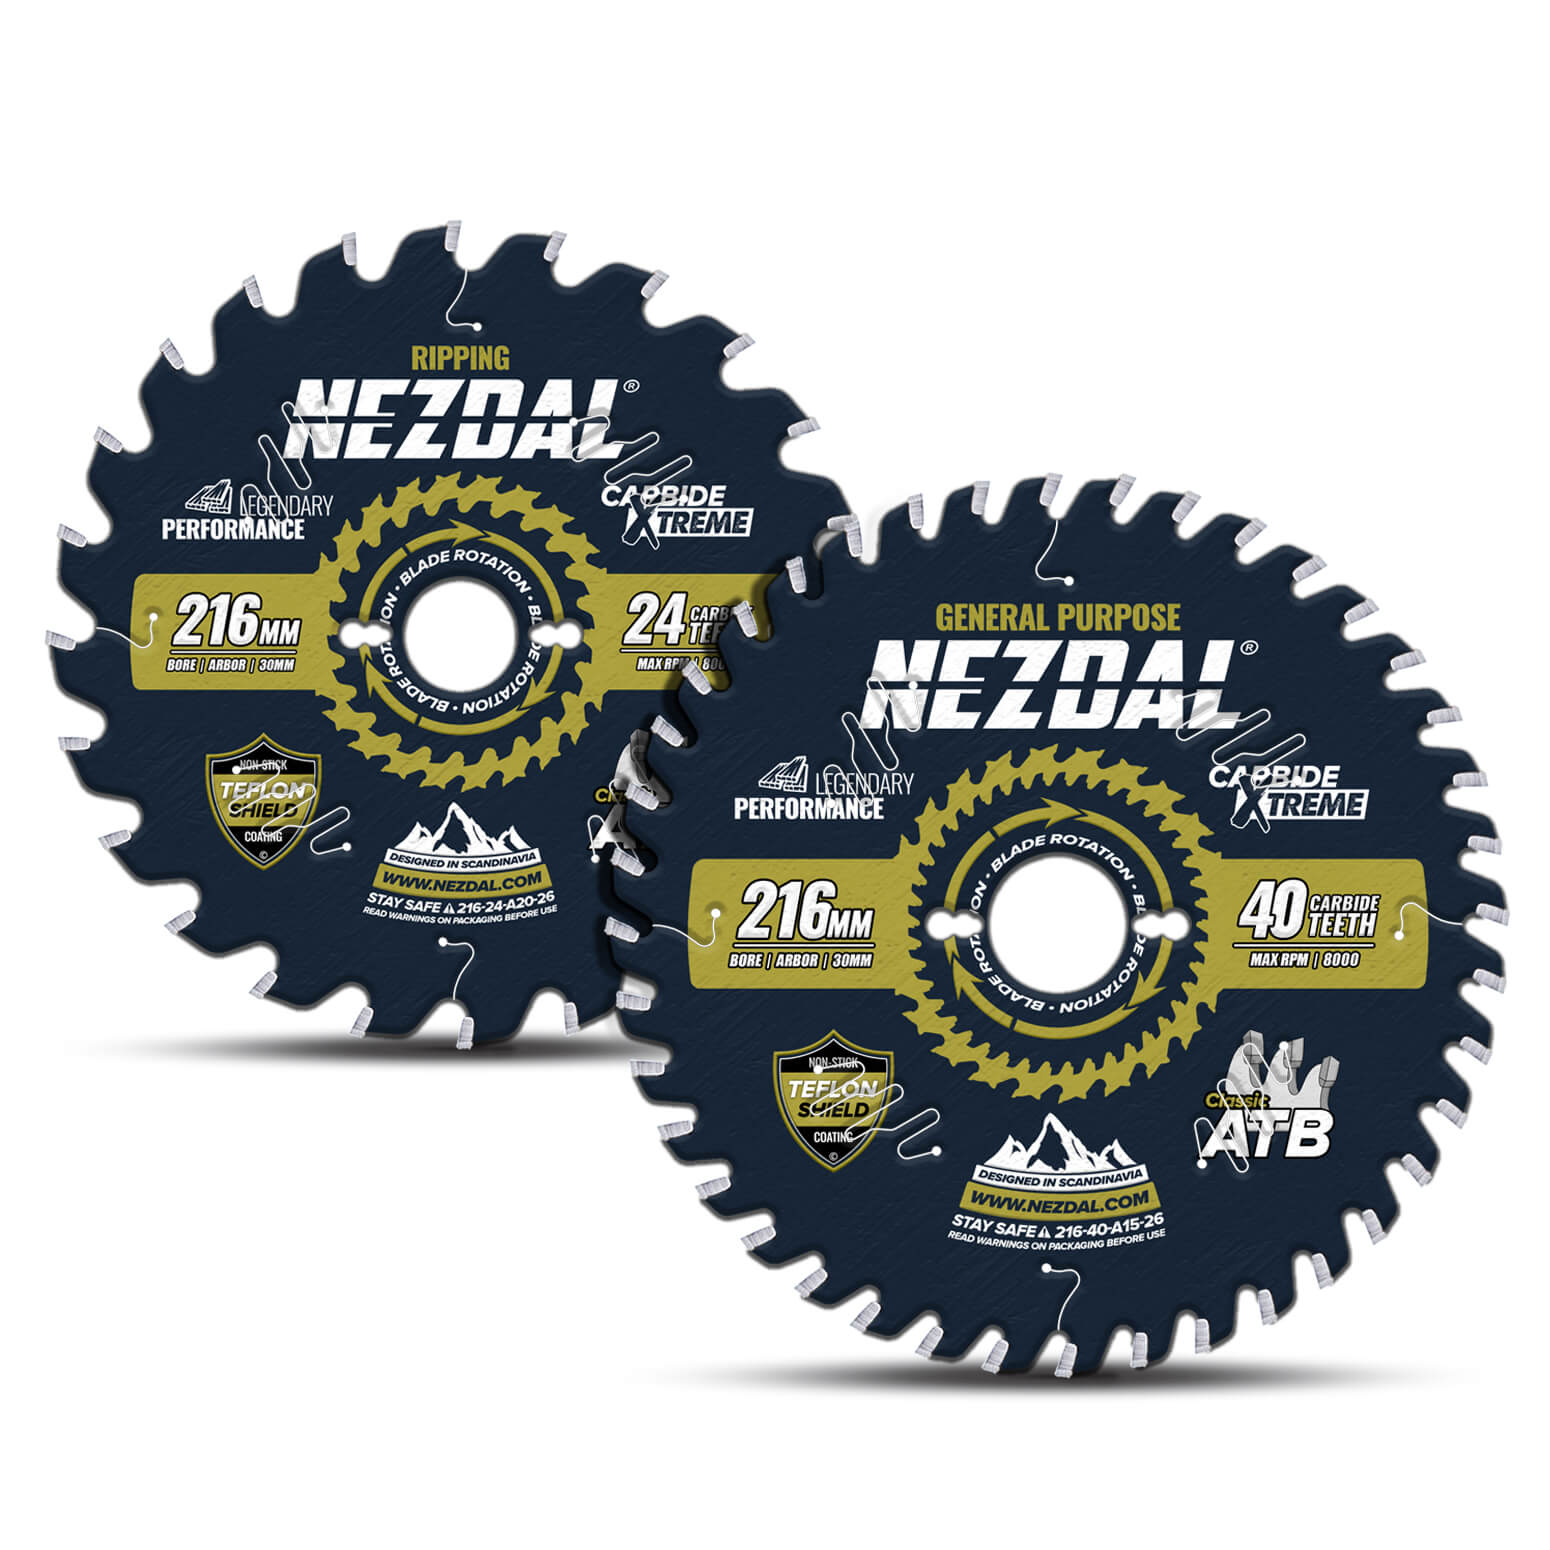 Two 216mm table saw blades for general purpose and ripping cuts in wood